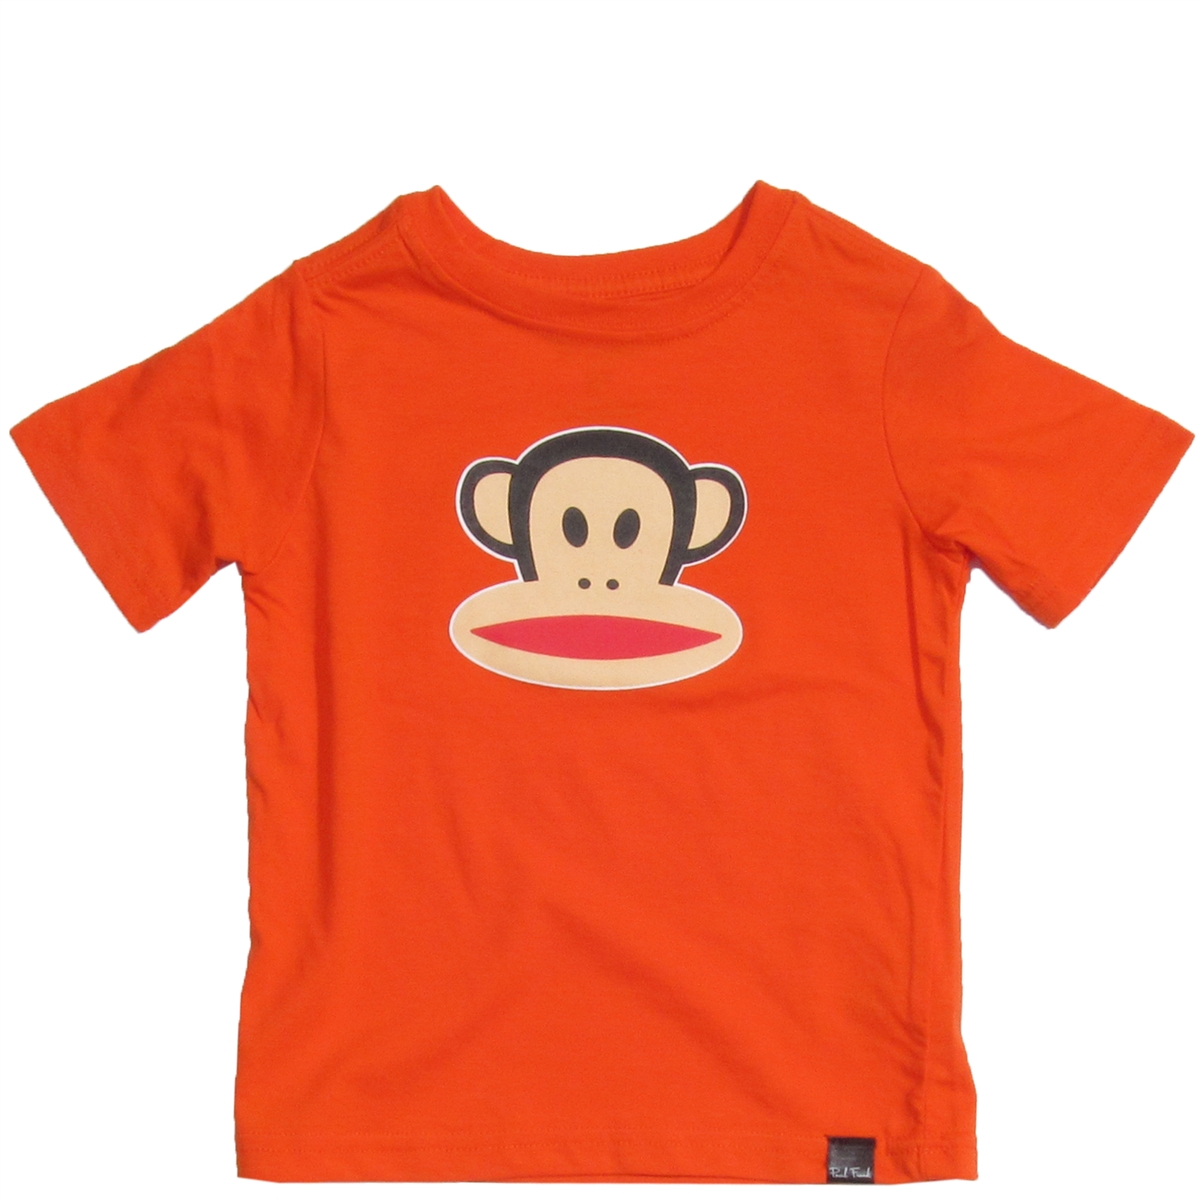 PAUL FRANK T-SHIRTS more images JSORGLX